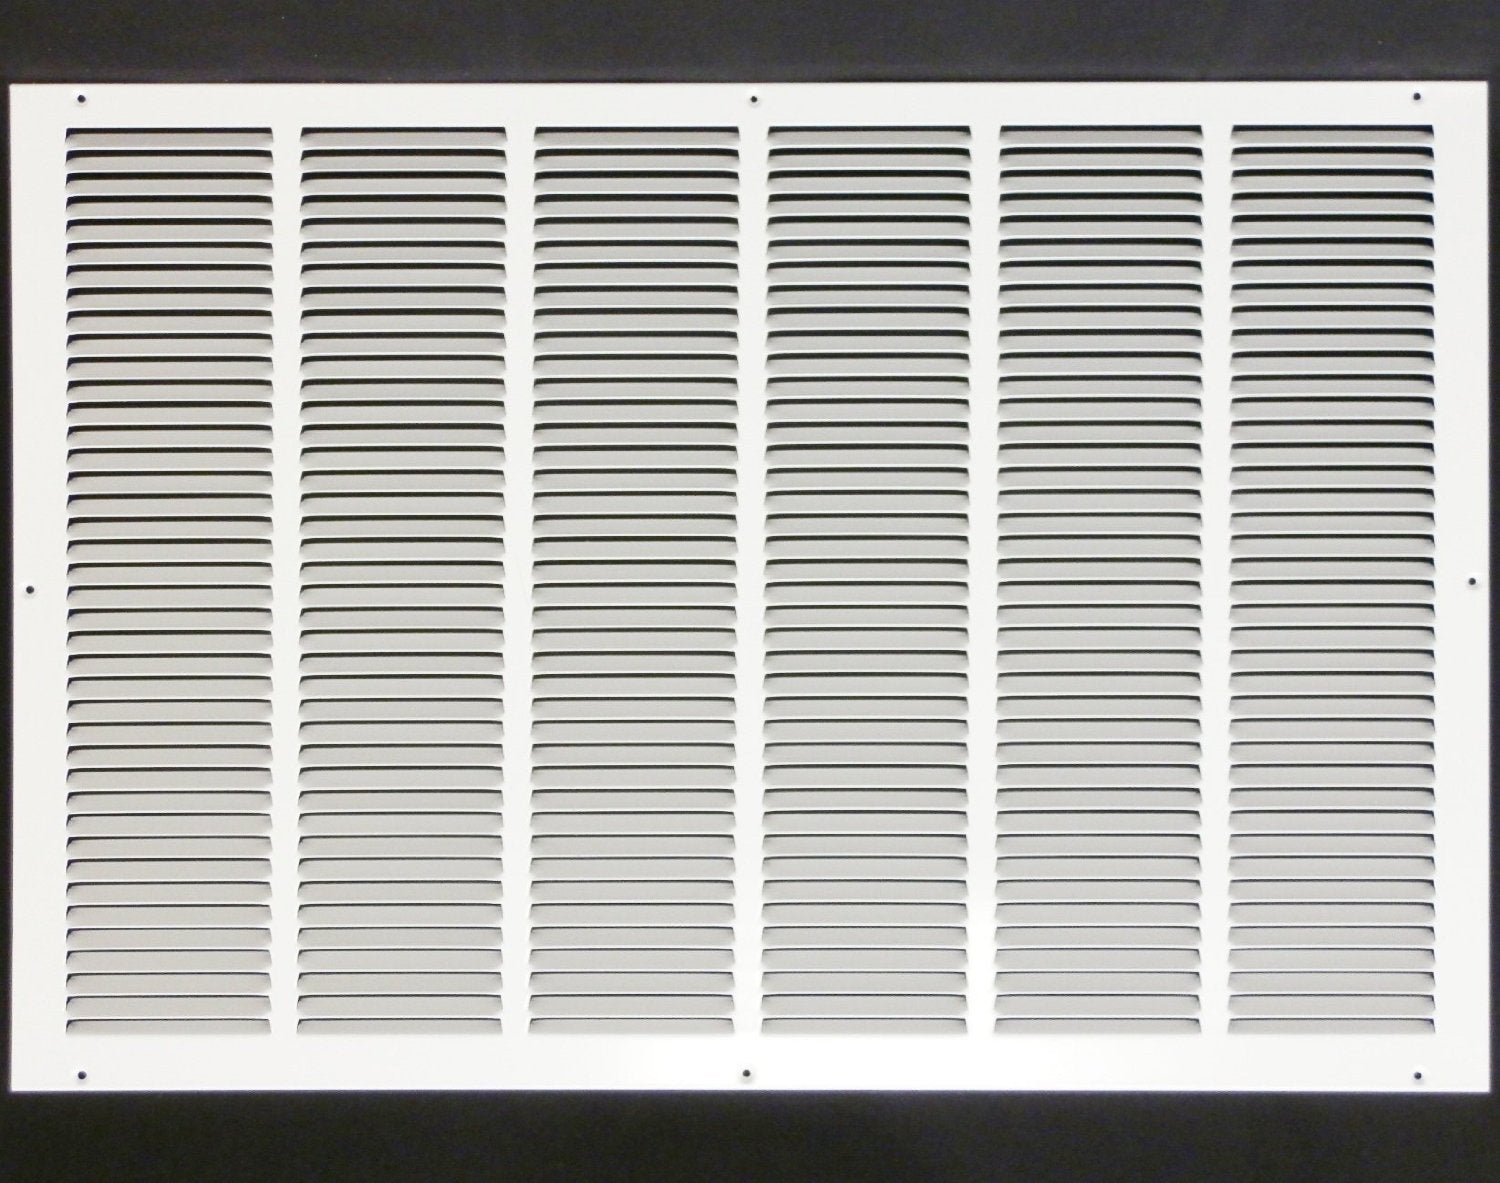 30" X 22" Air Vent Return Grilles - Sidewall and Ceiling - Steel